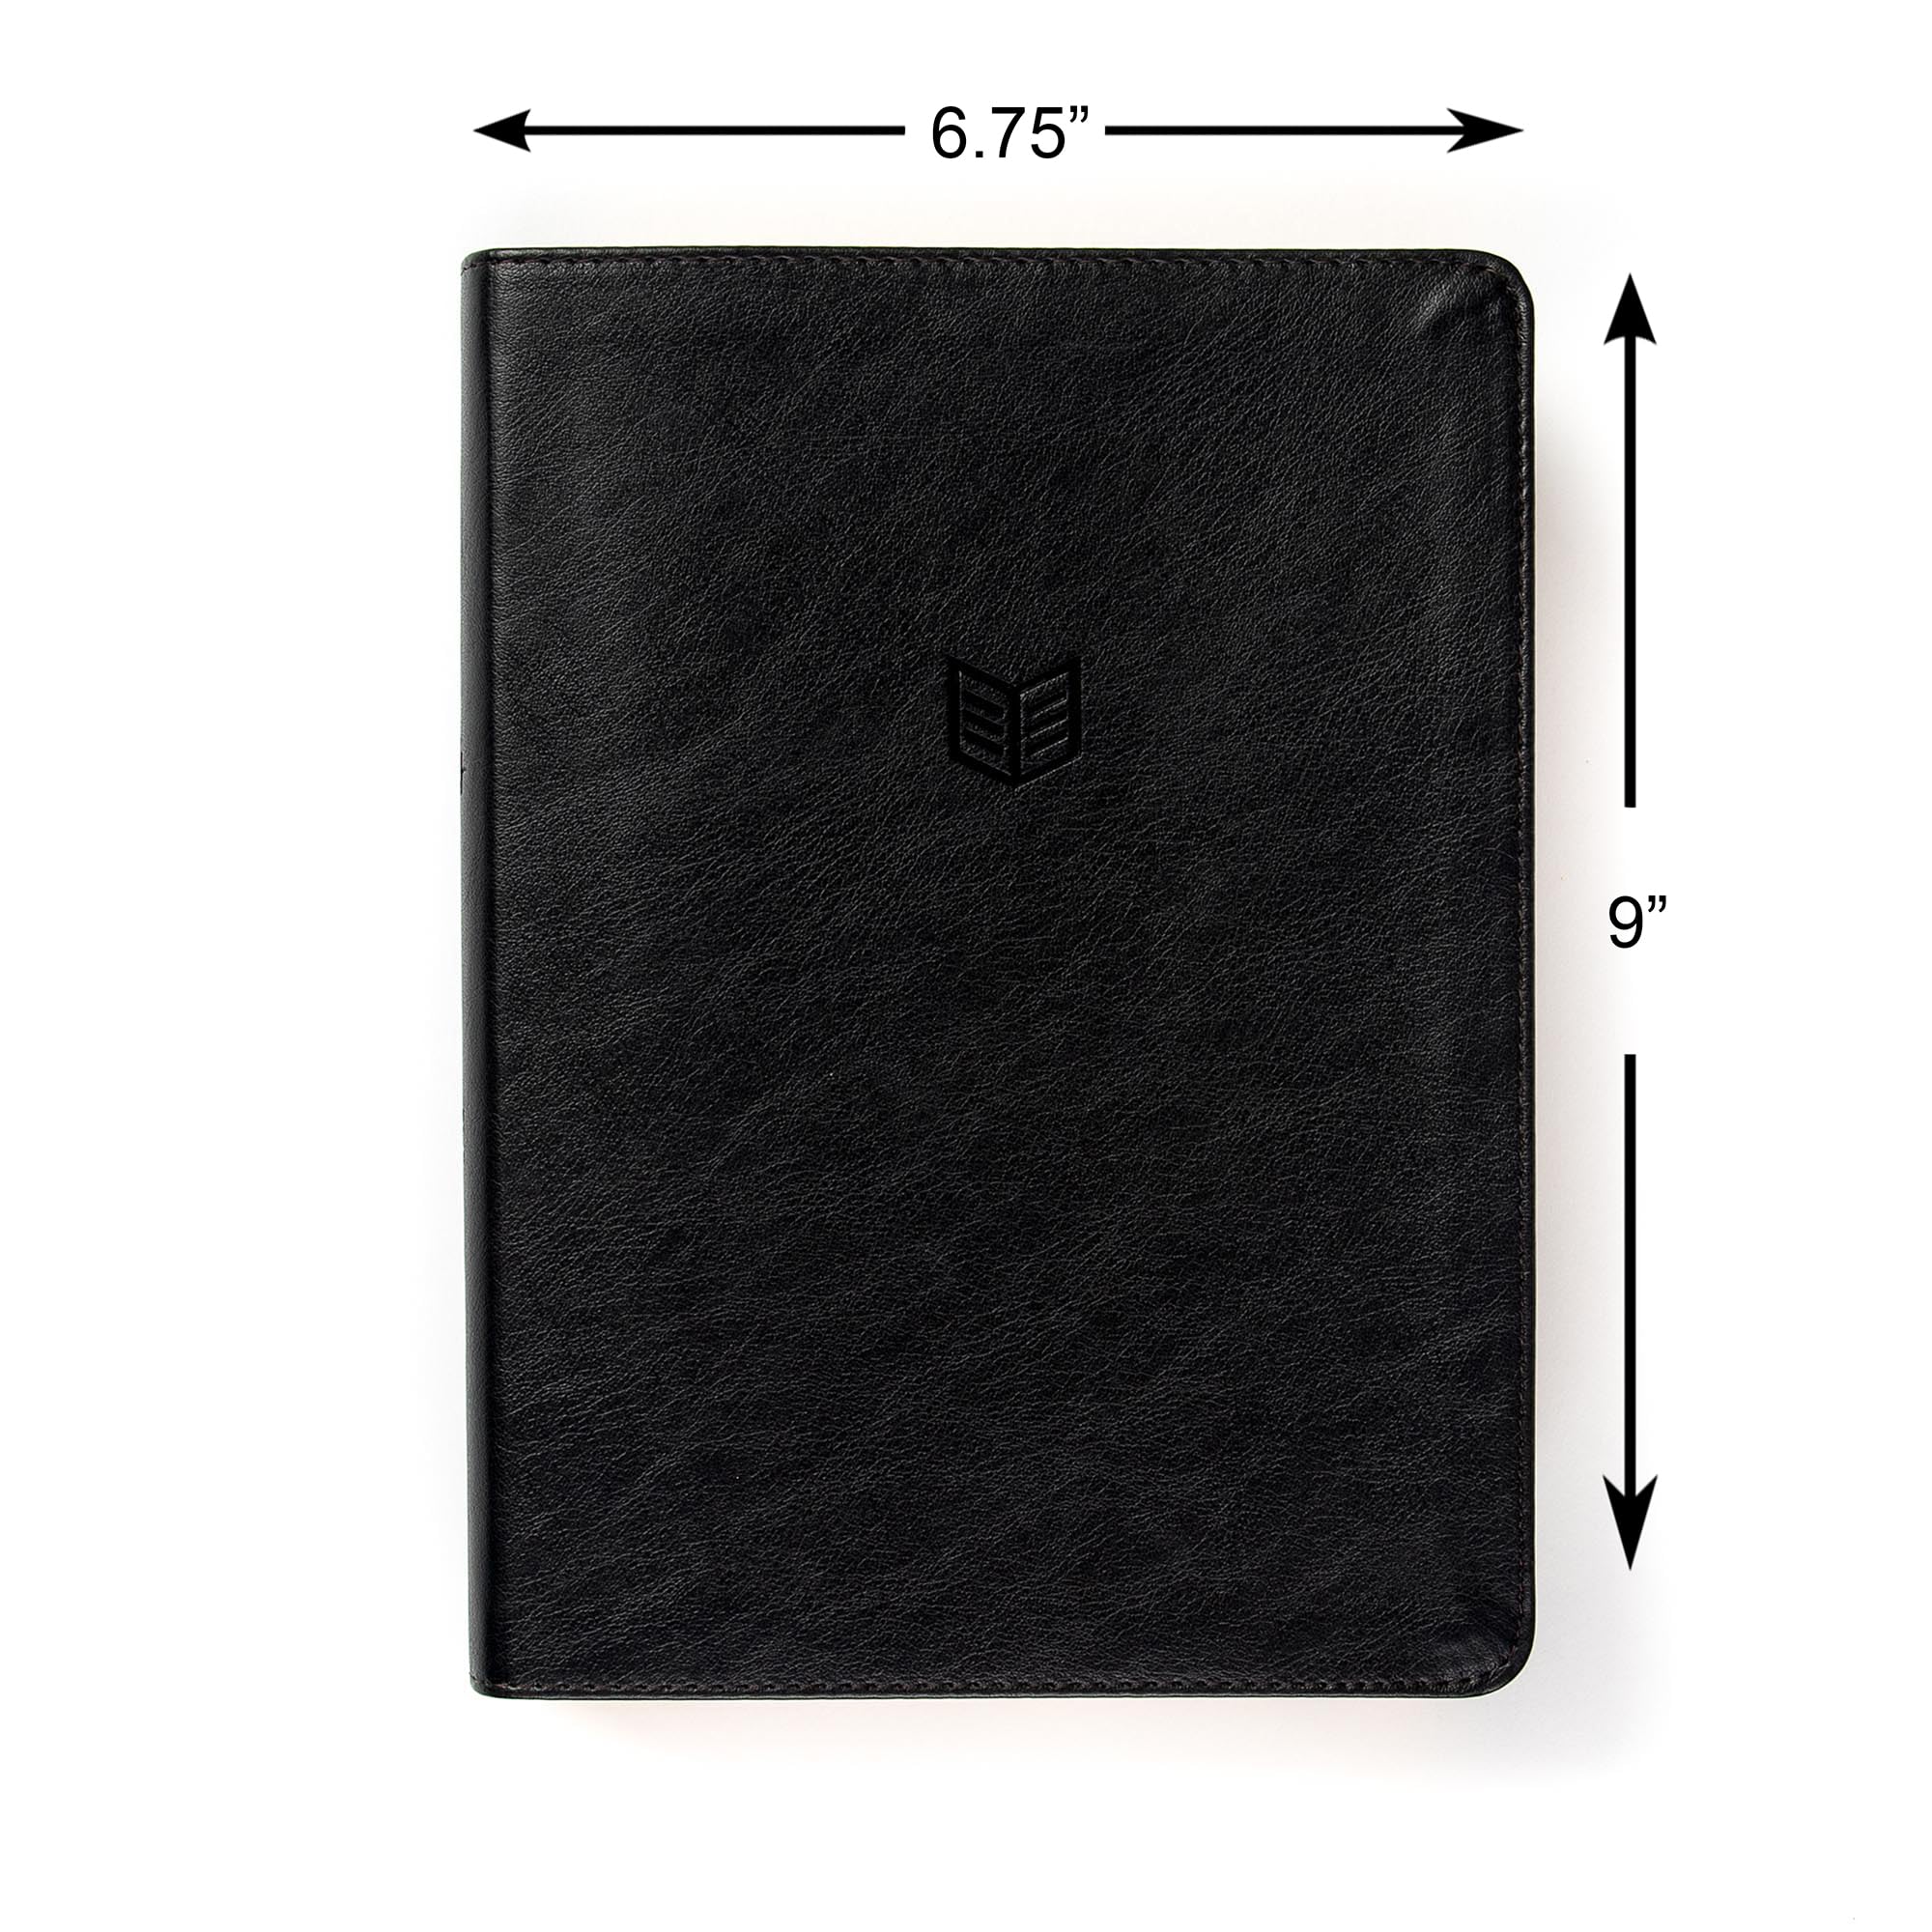 CSB She Reads Truth Bible, Black LeatherTouch, Black Letter, Full-Color Design, Wide Margins, Journaling Space, Devotionals, Reading Plans, Single-Column, Easy-to-Read Bible Serif Type